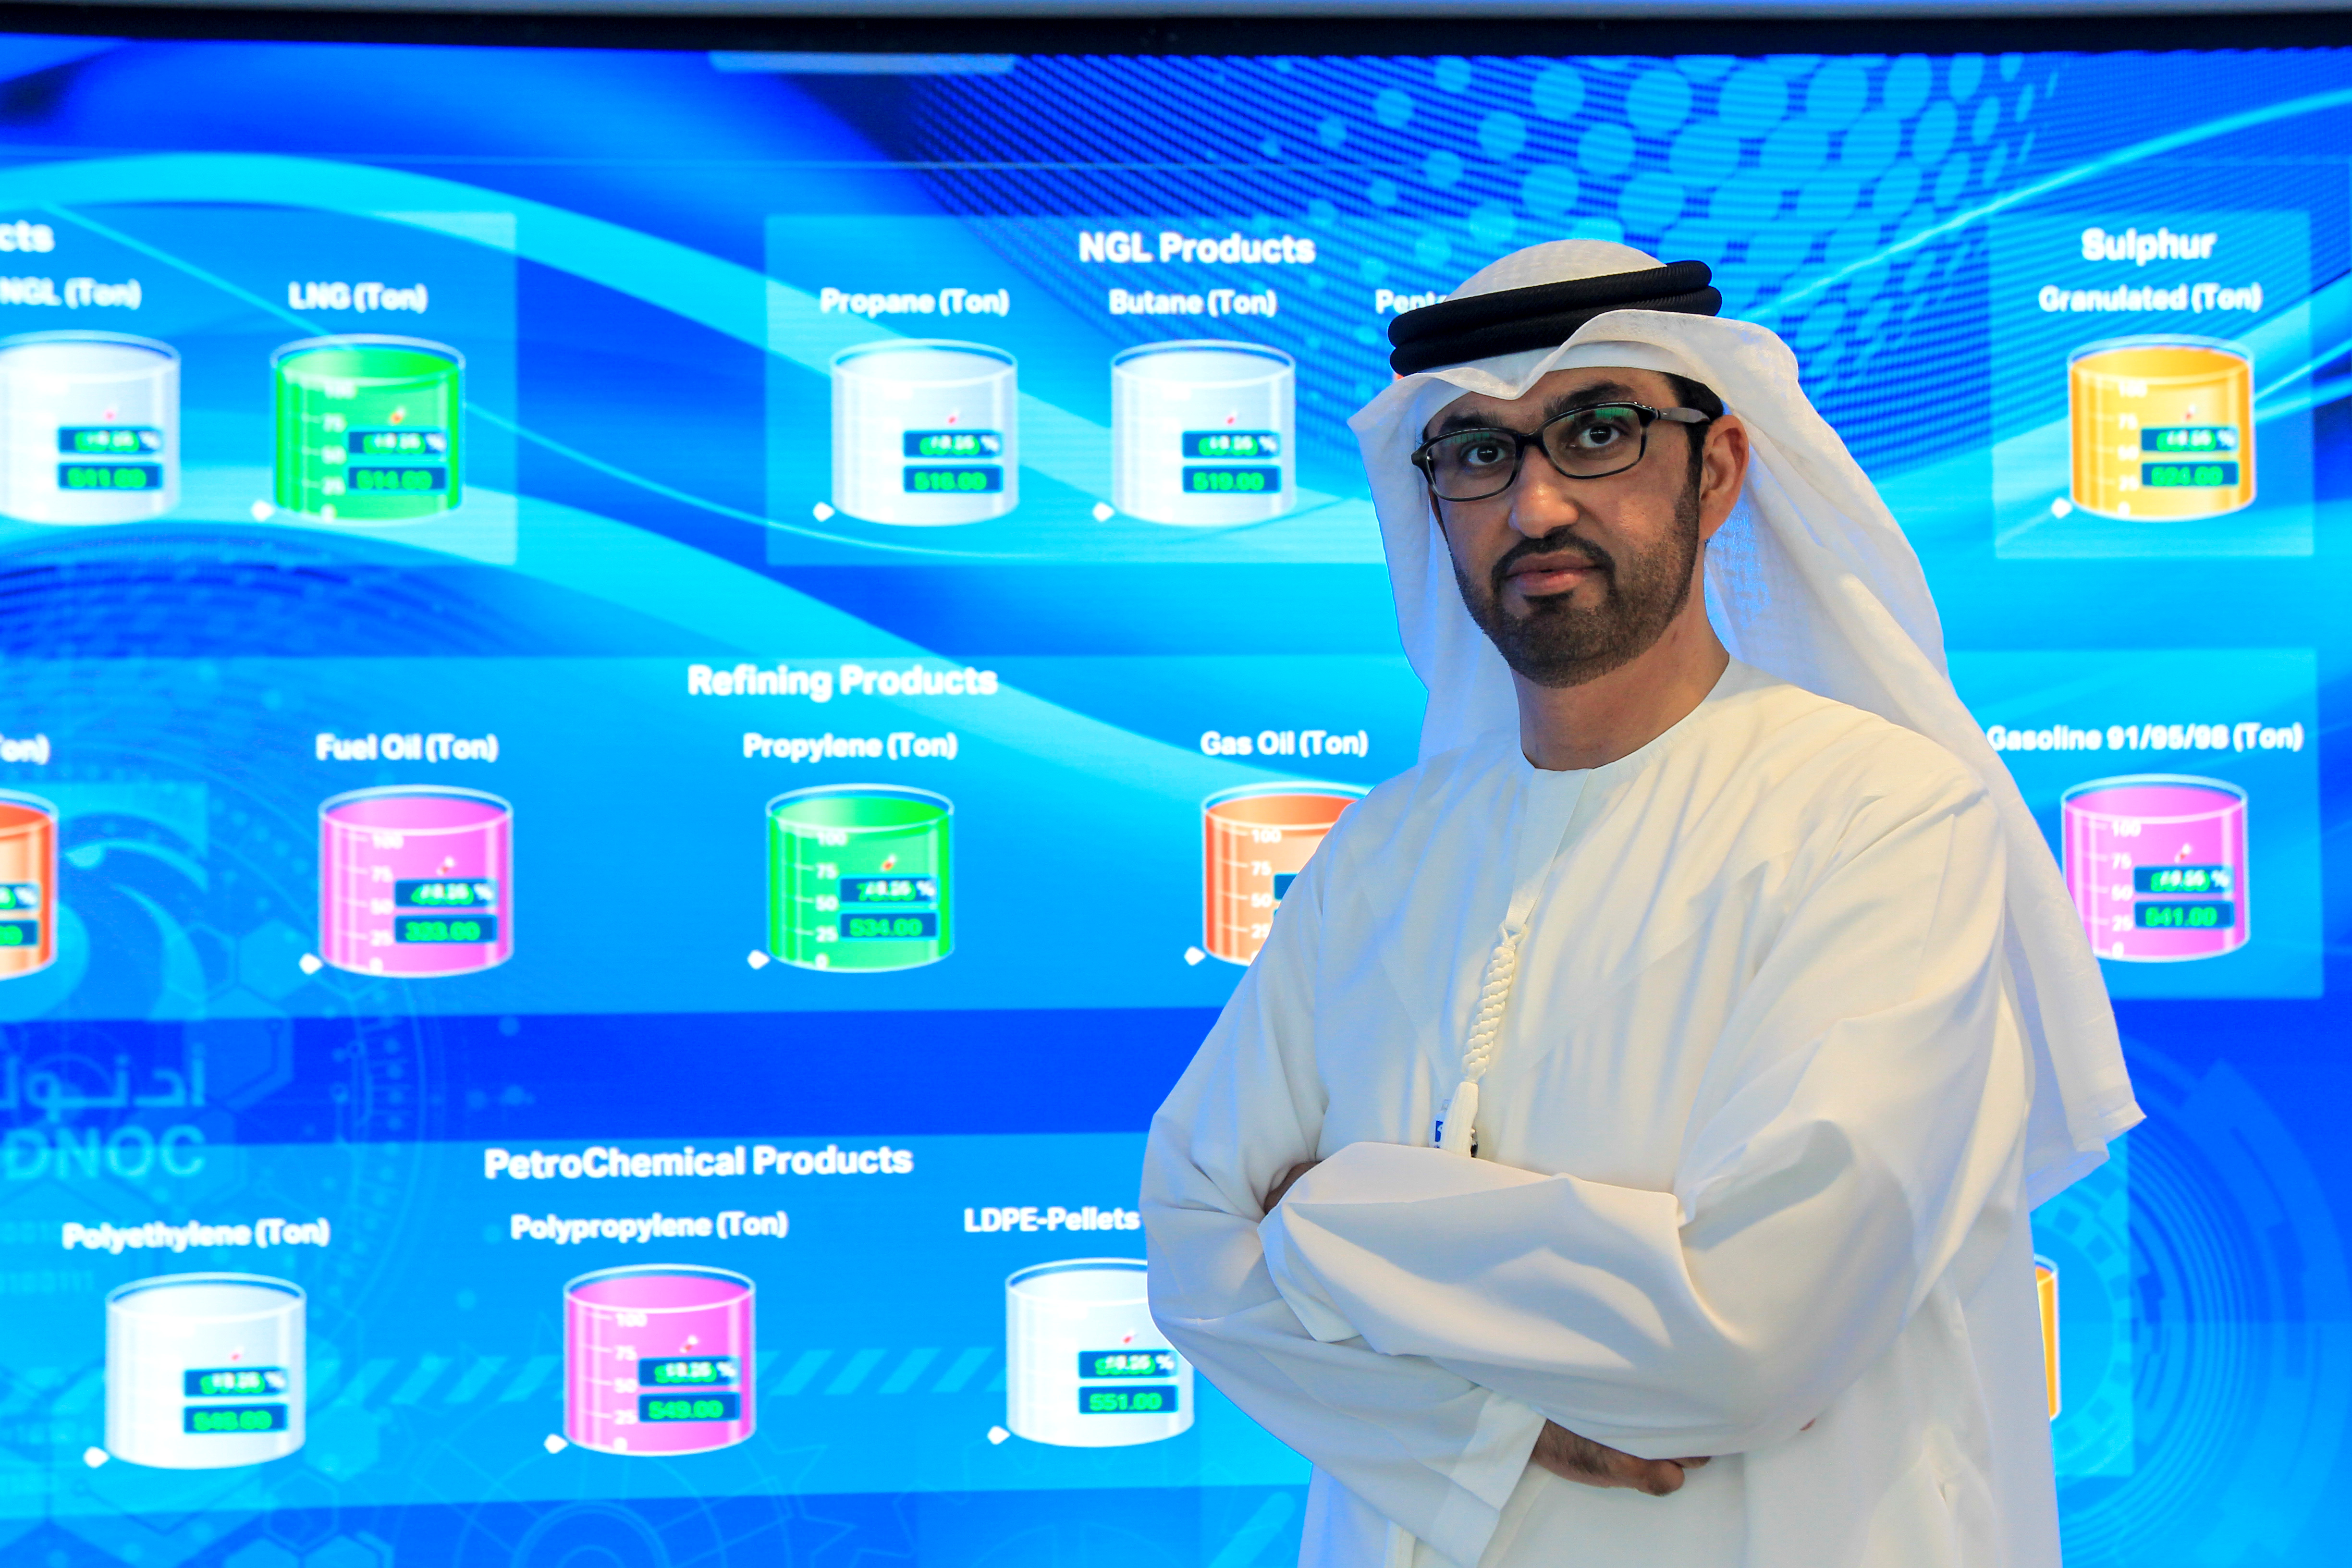 Sultan Ahmed Al Jaber, UAE Minister of State and the Abu Dhabi National Oil Company (ADNOC) Group CEO poses during an interview at the Panorama Digital Command Centre, at the ADNOC headquarters in Abu Dhabi, UAE December 10, 2019. Picture taken December 10, 2019. REUTERS/Satish Kumar